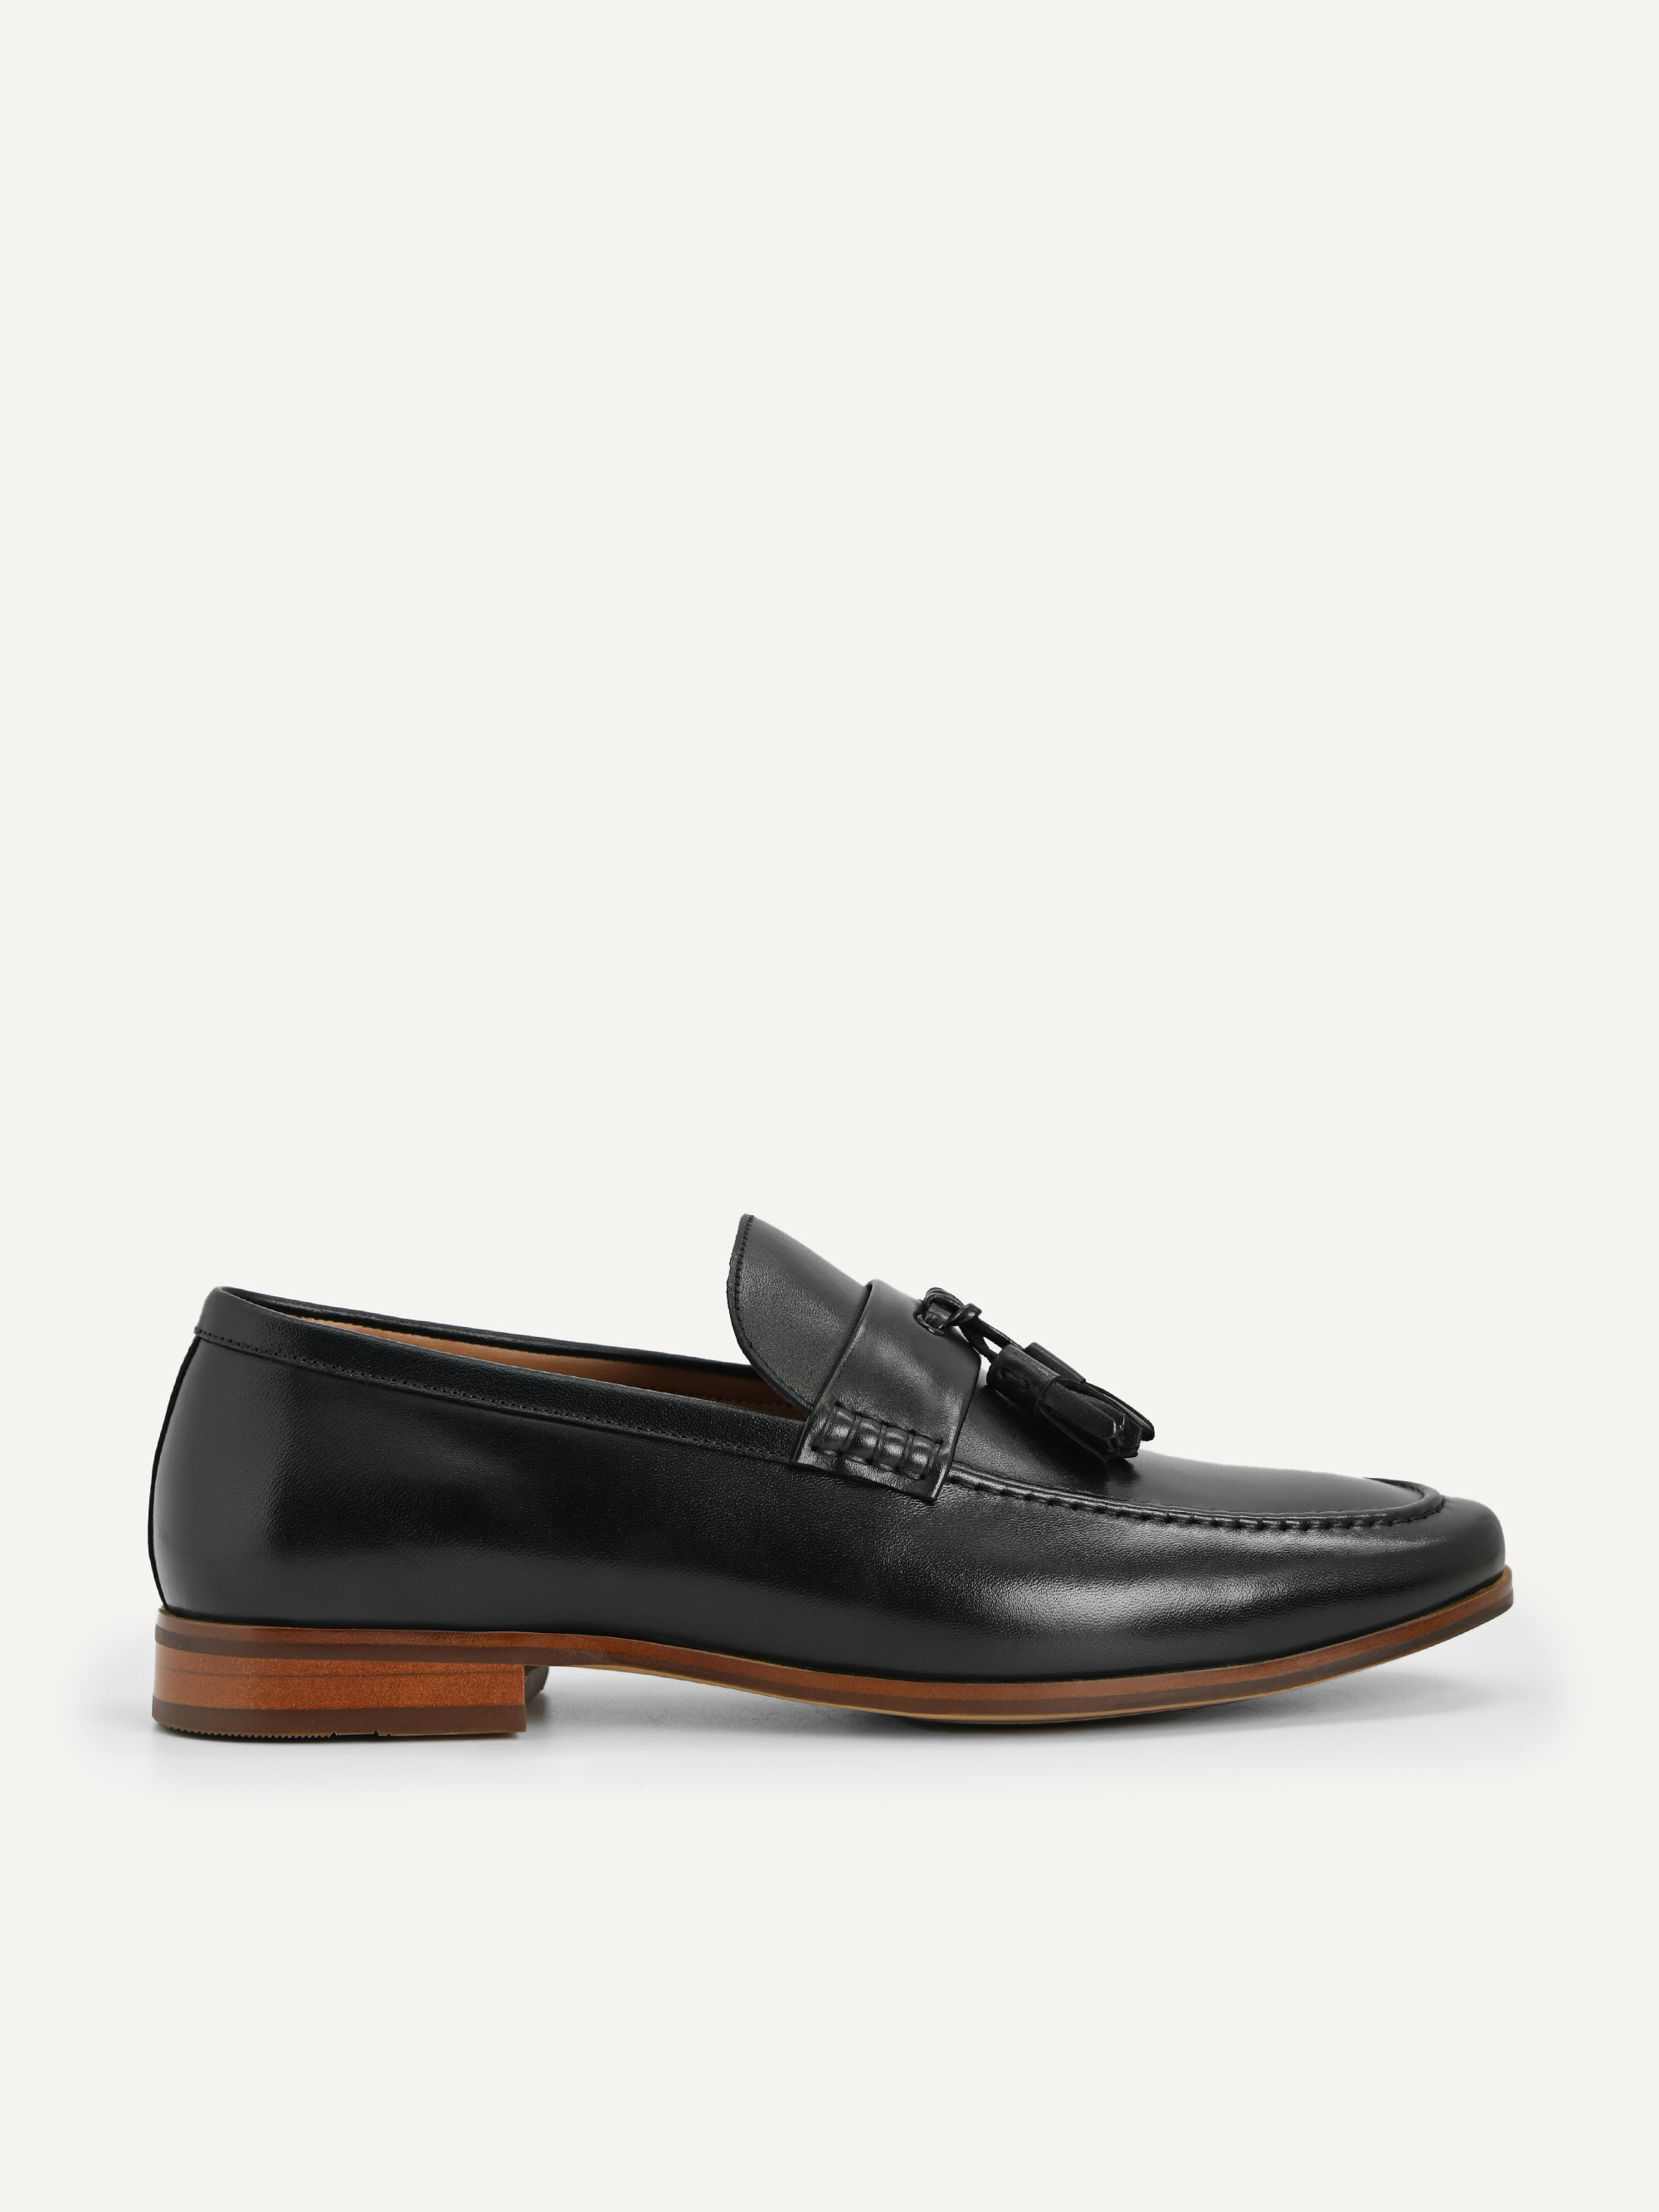 Leather Tasselled Loafers - PEDRO MY